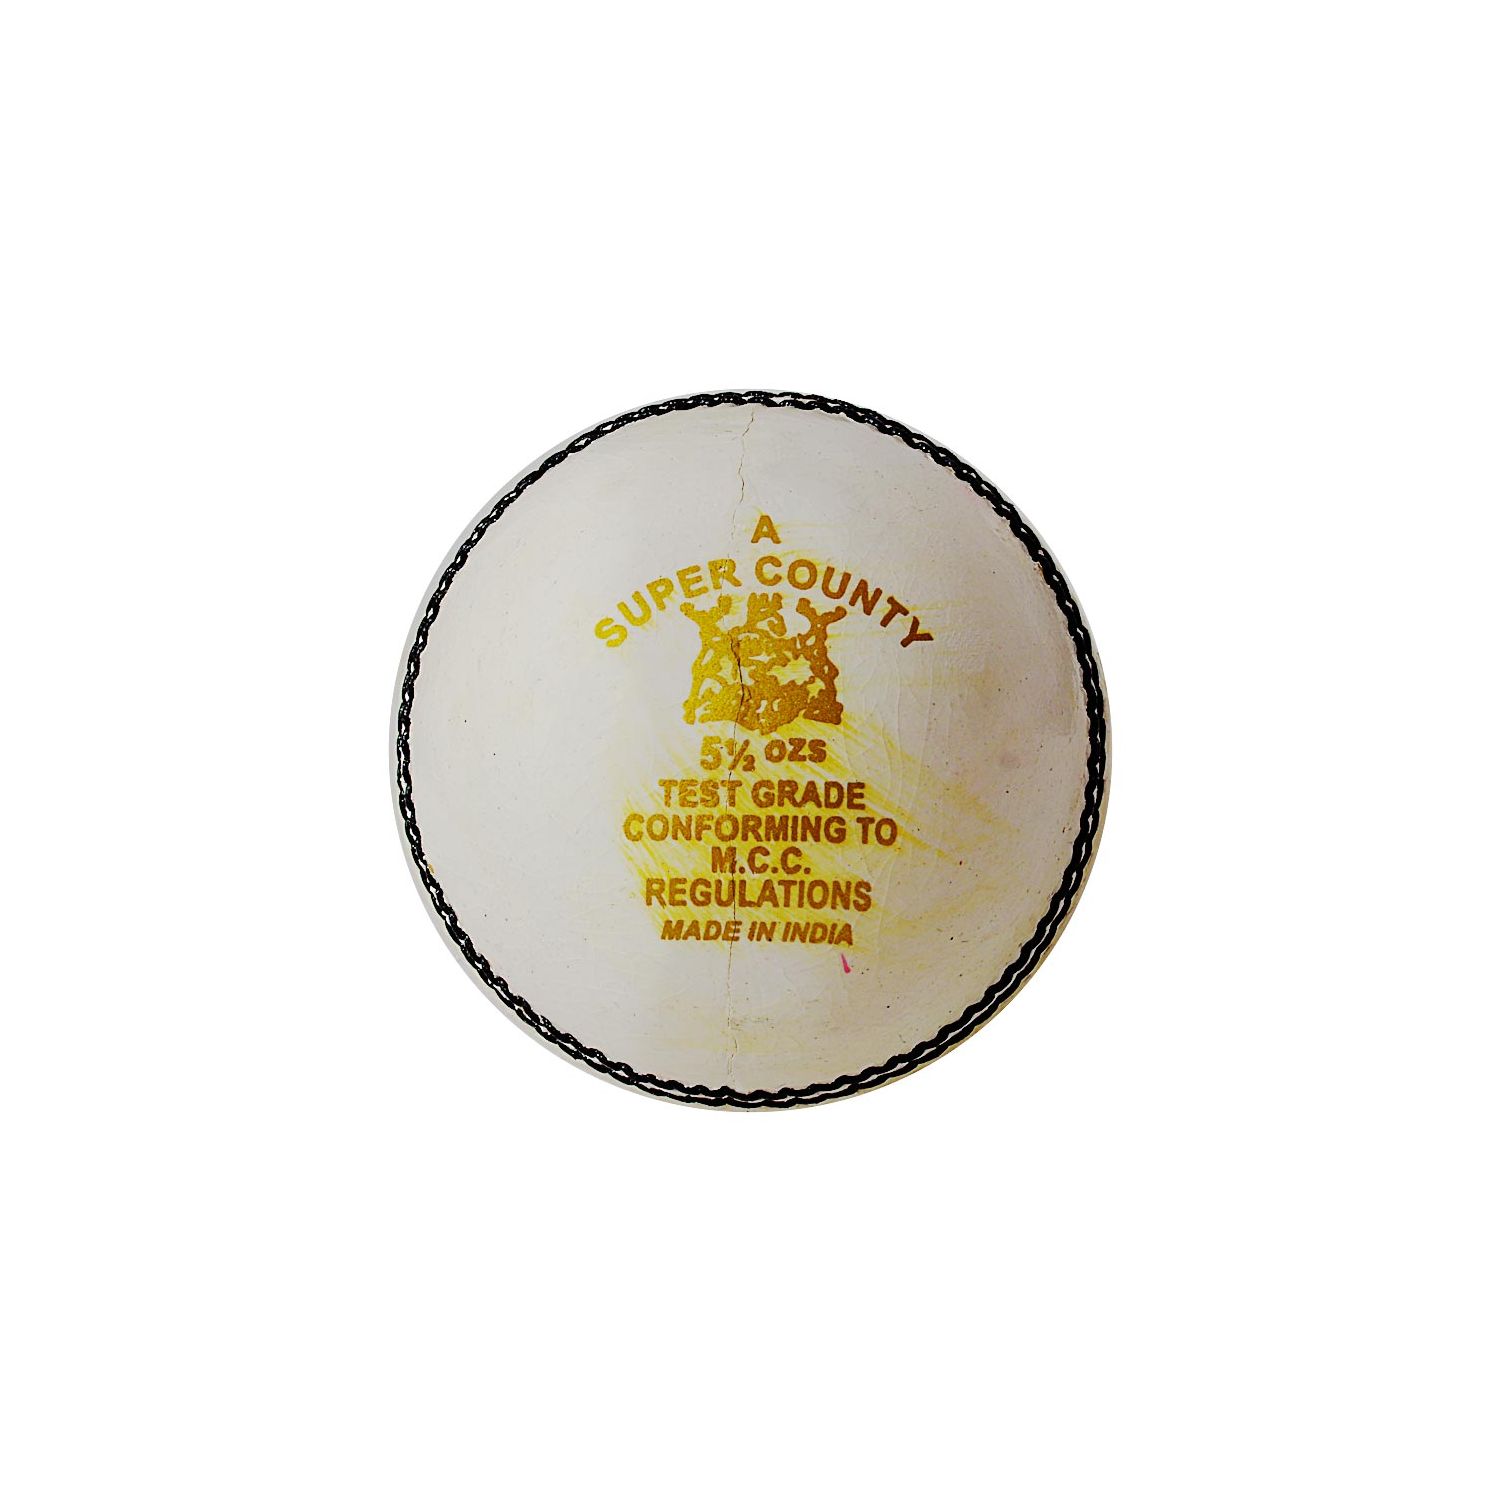 Super County Leather Cricket Ball